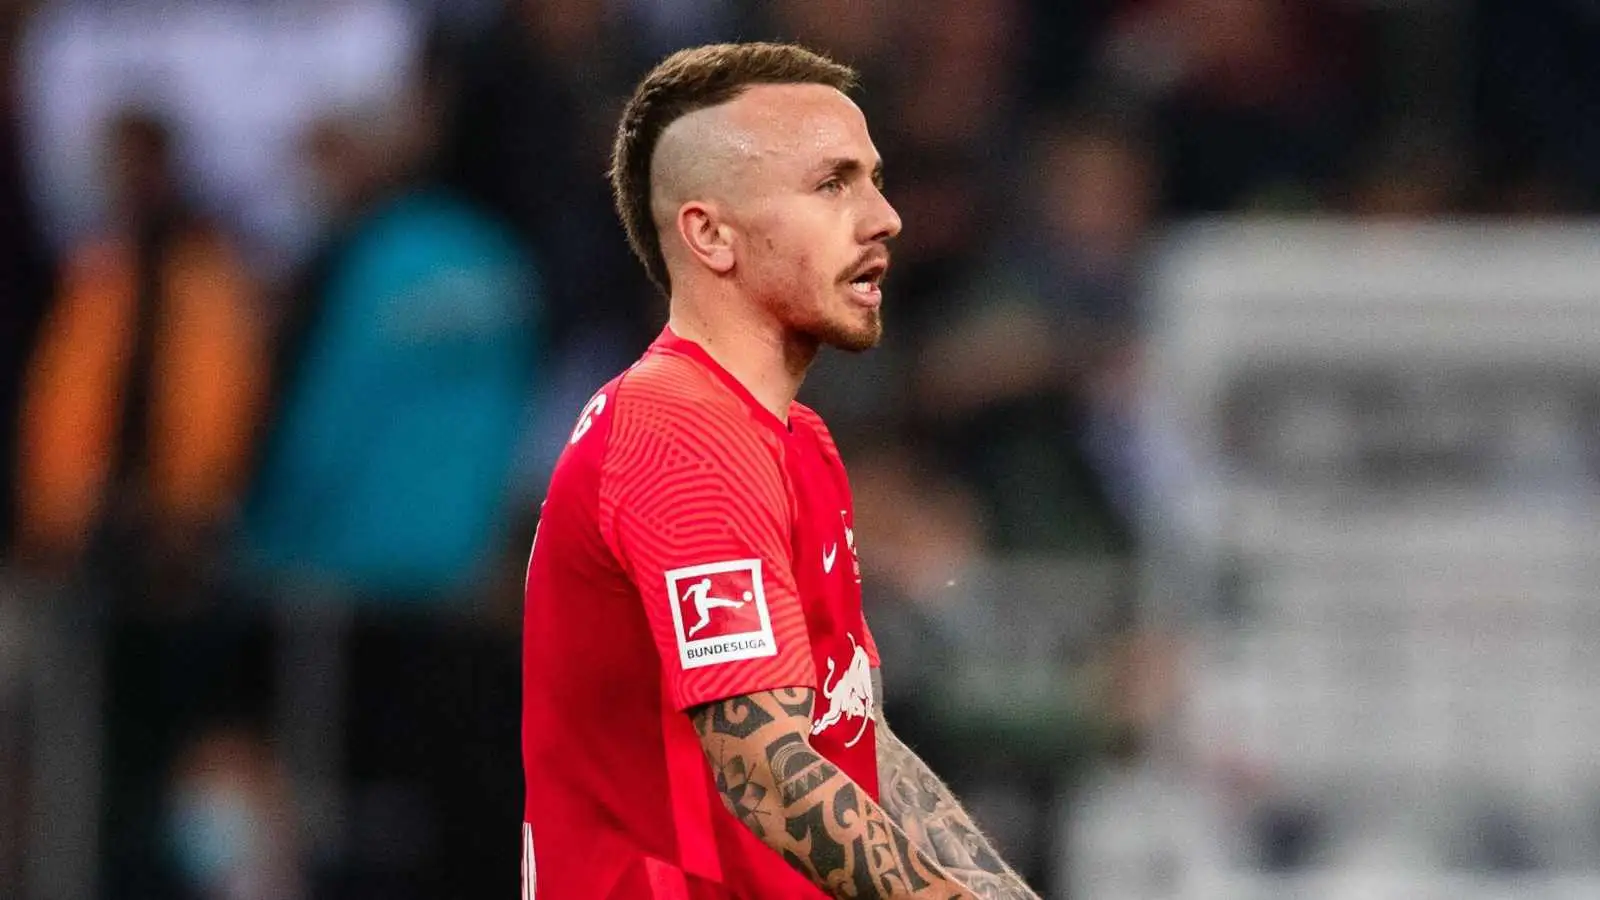 Angelino after an RB Leipzig match